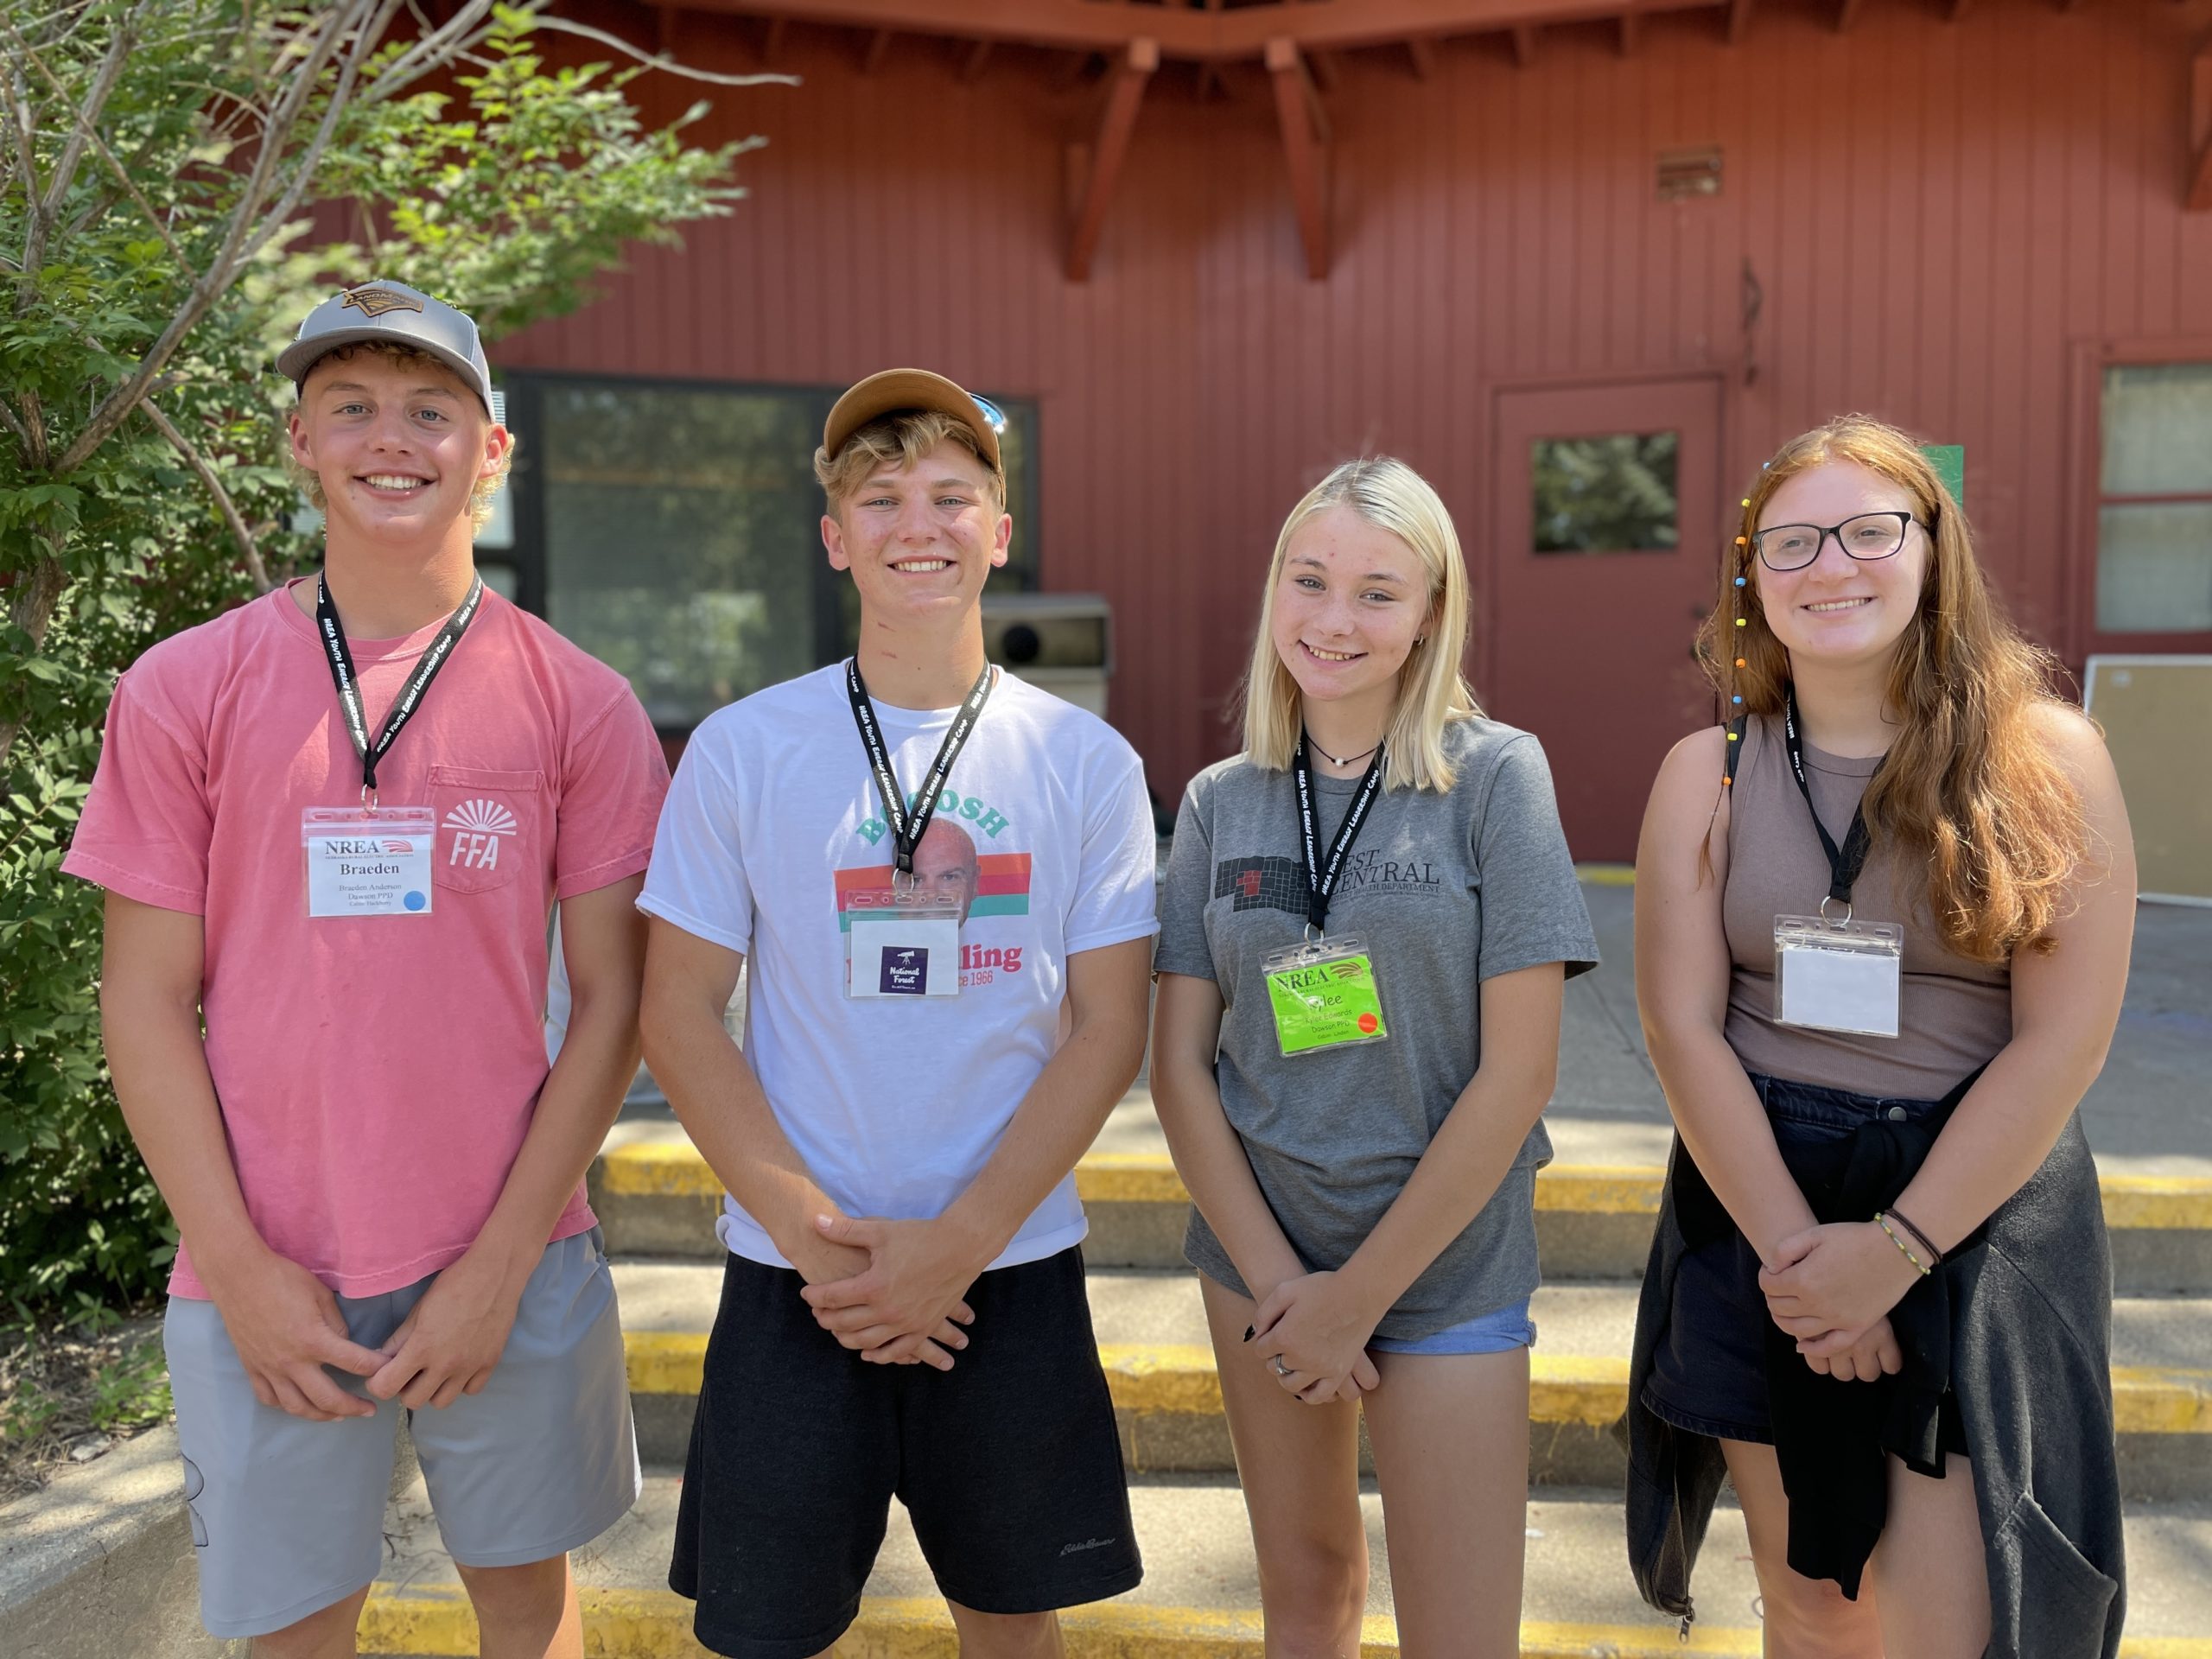 Students attended the Nebraska Rural Electric Association Youth Energy Leadership Camp on behalf of Dawson Public Power District. From left: Braeden Anderson, Austin Smith, Kylee Edwards (2021 YELC attendee and 2022 junior camp counselor) and Ava Brodine.